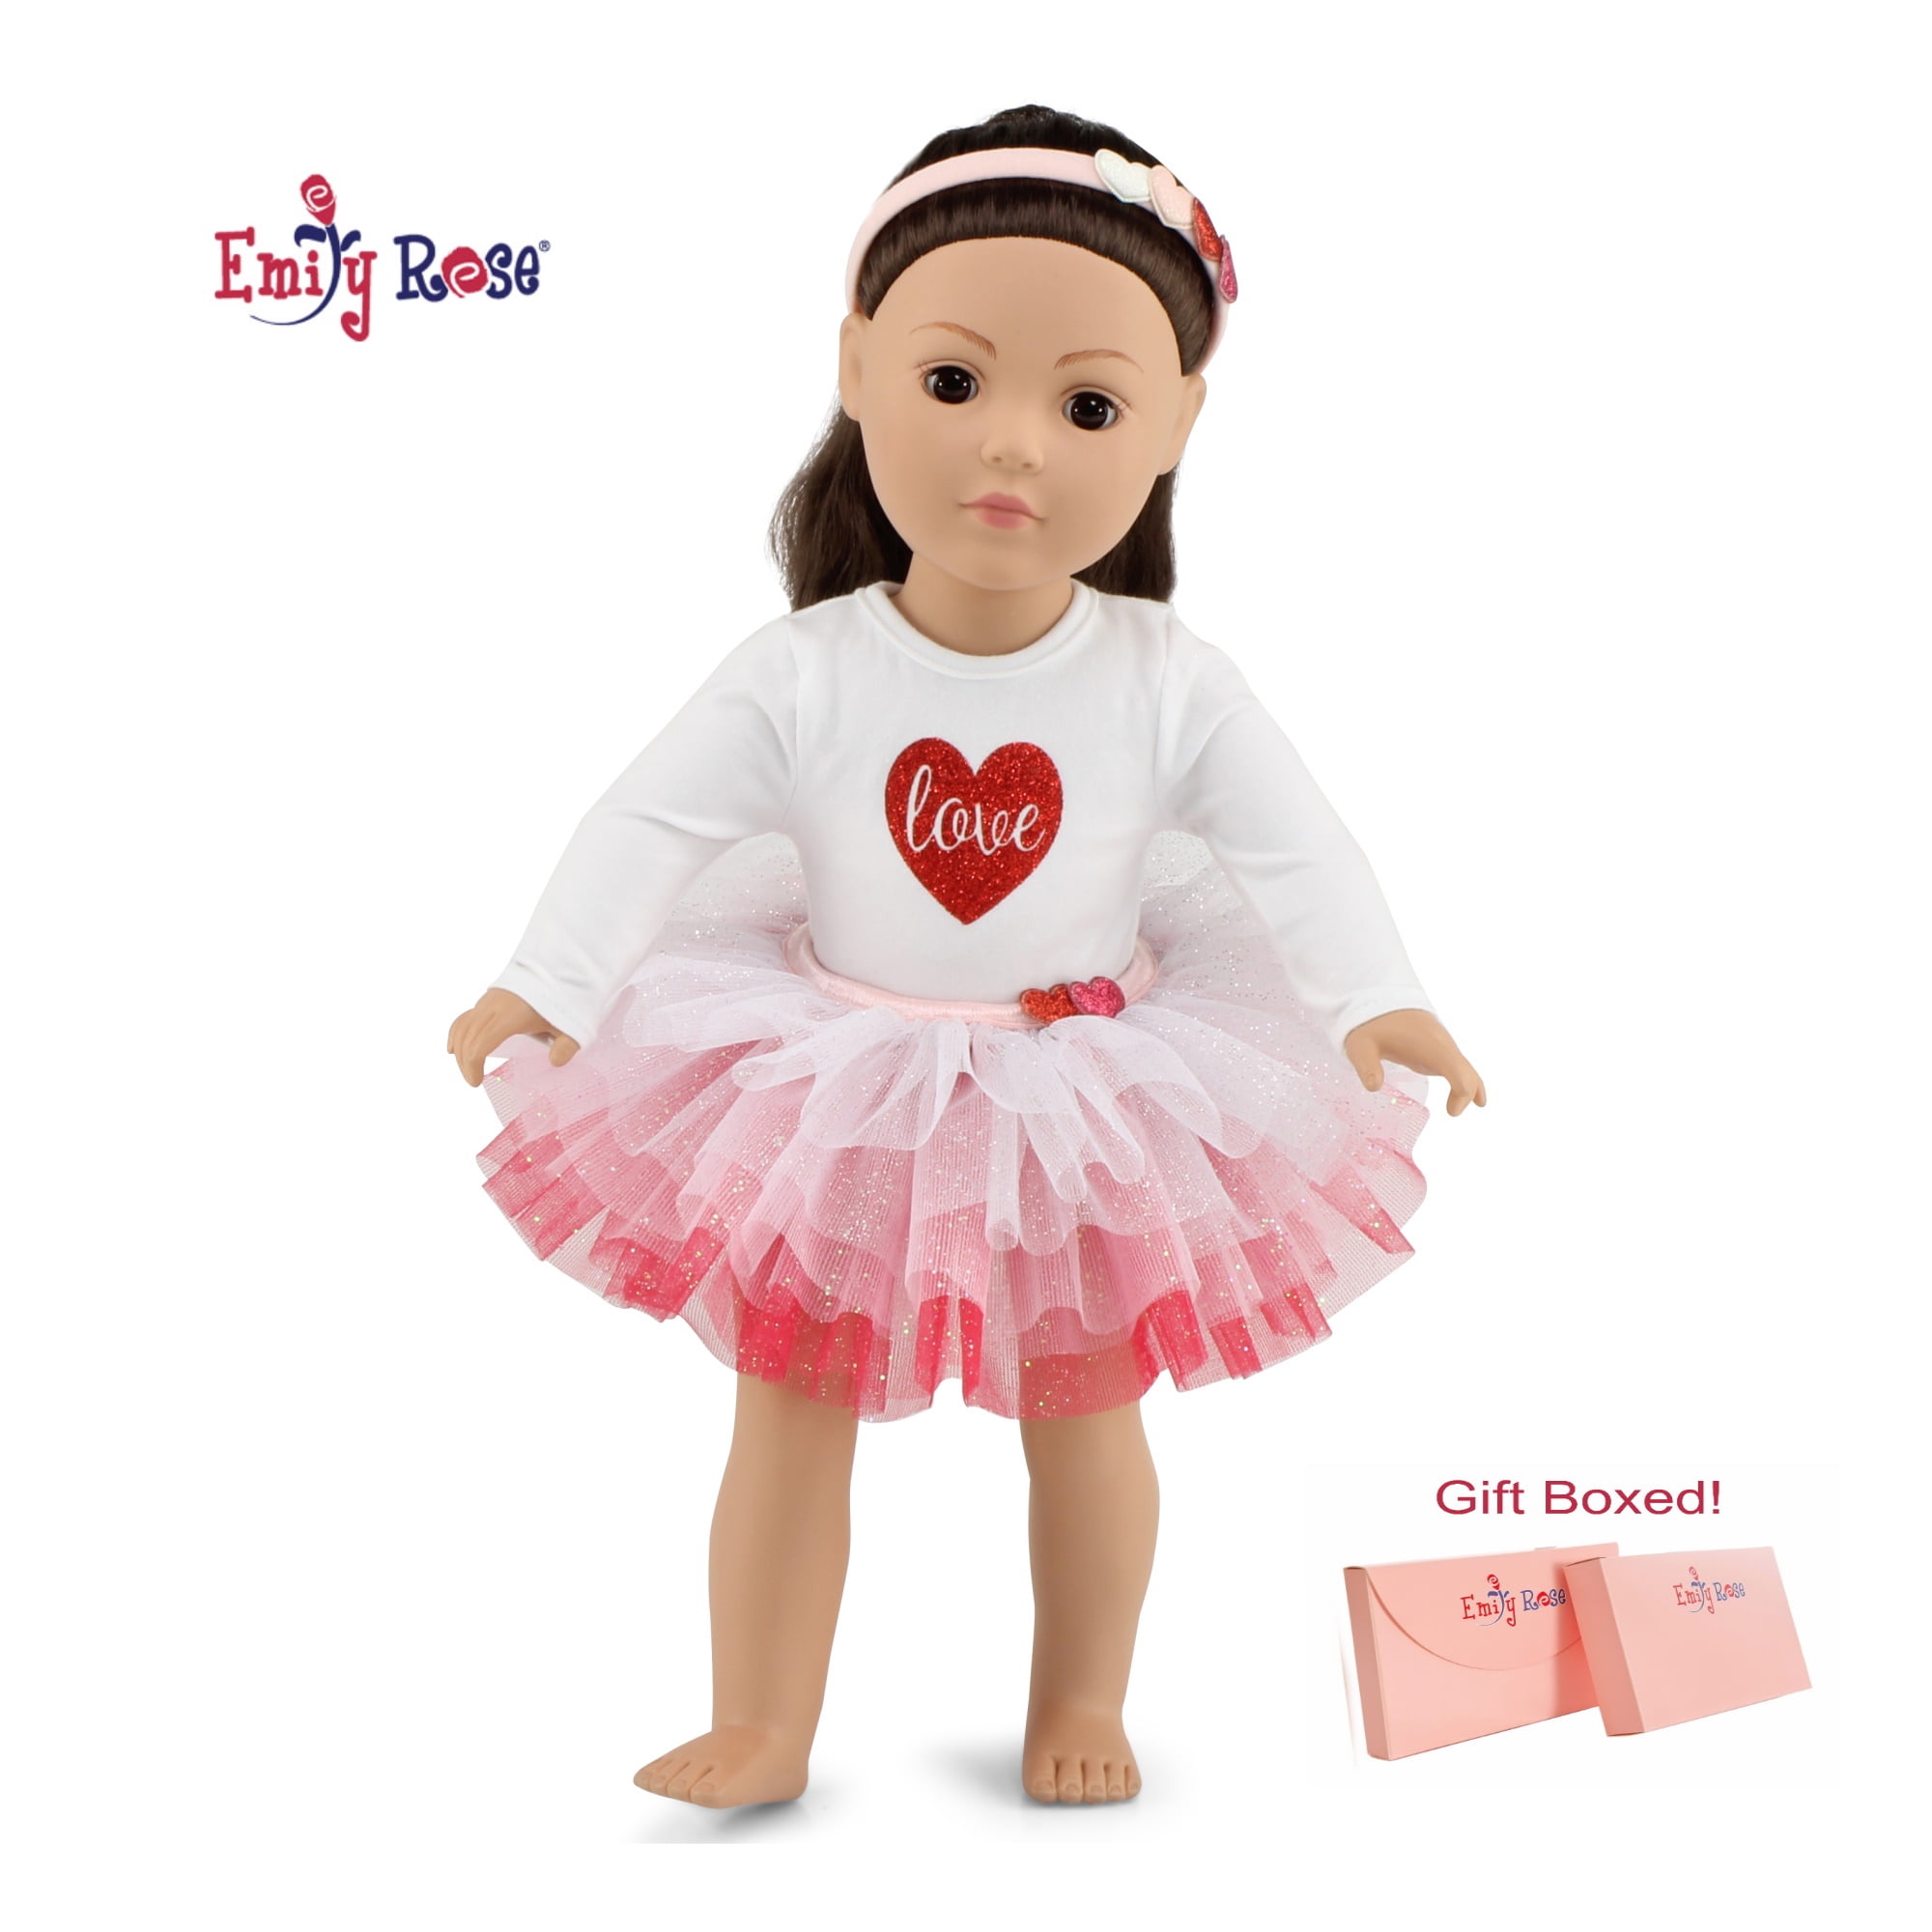 Pink Heart Love Peace Long Sleeve Tee Shirt fits 18" American Girl Size Doll